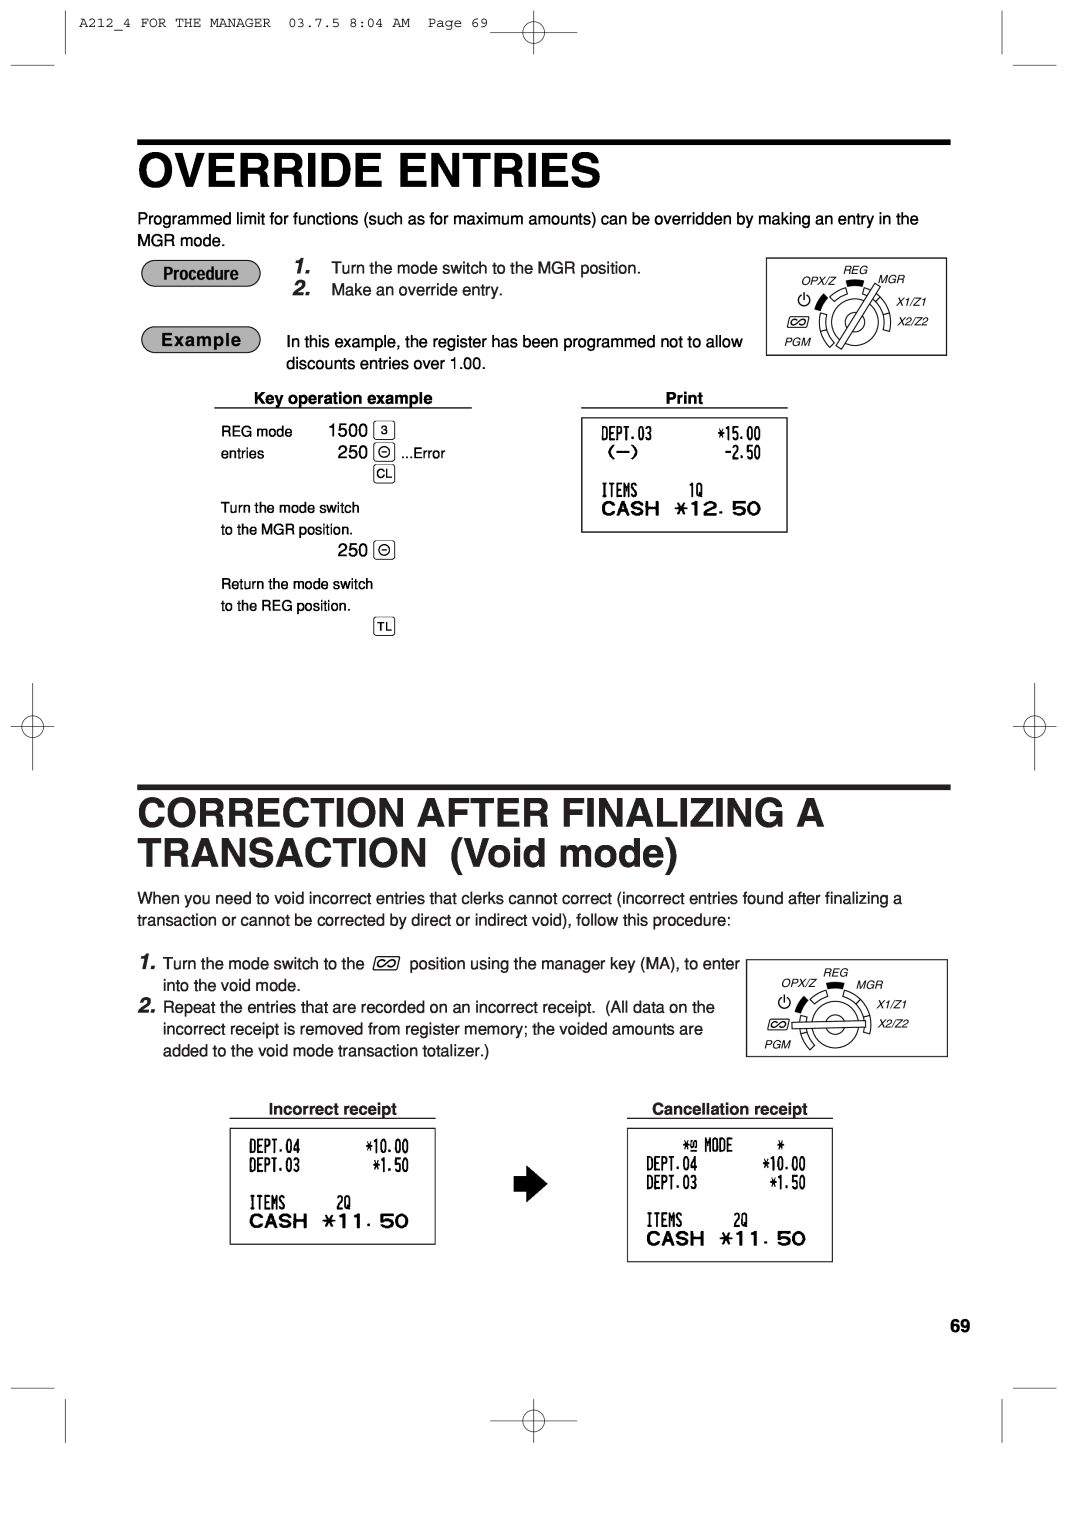 Sharp XE-A212 Override Entries, CORRECTION AFTER FINALIZING A TRANSACTION Void mode, 1500, Key operation example, Print 